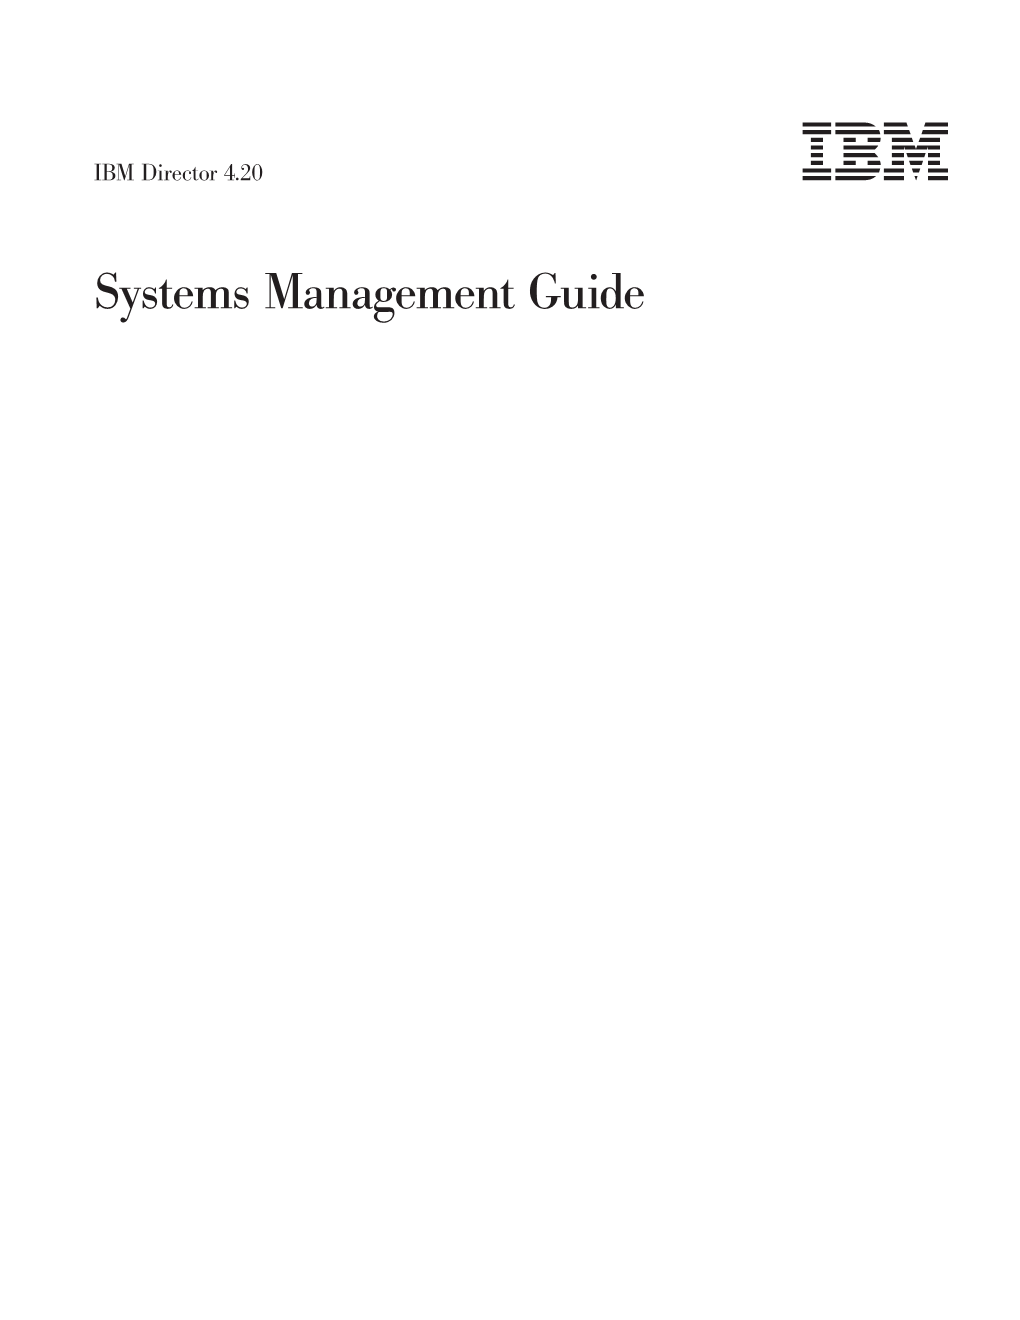 IBM Director 4.20: Systems Management Guide